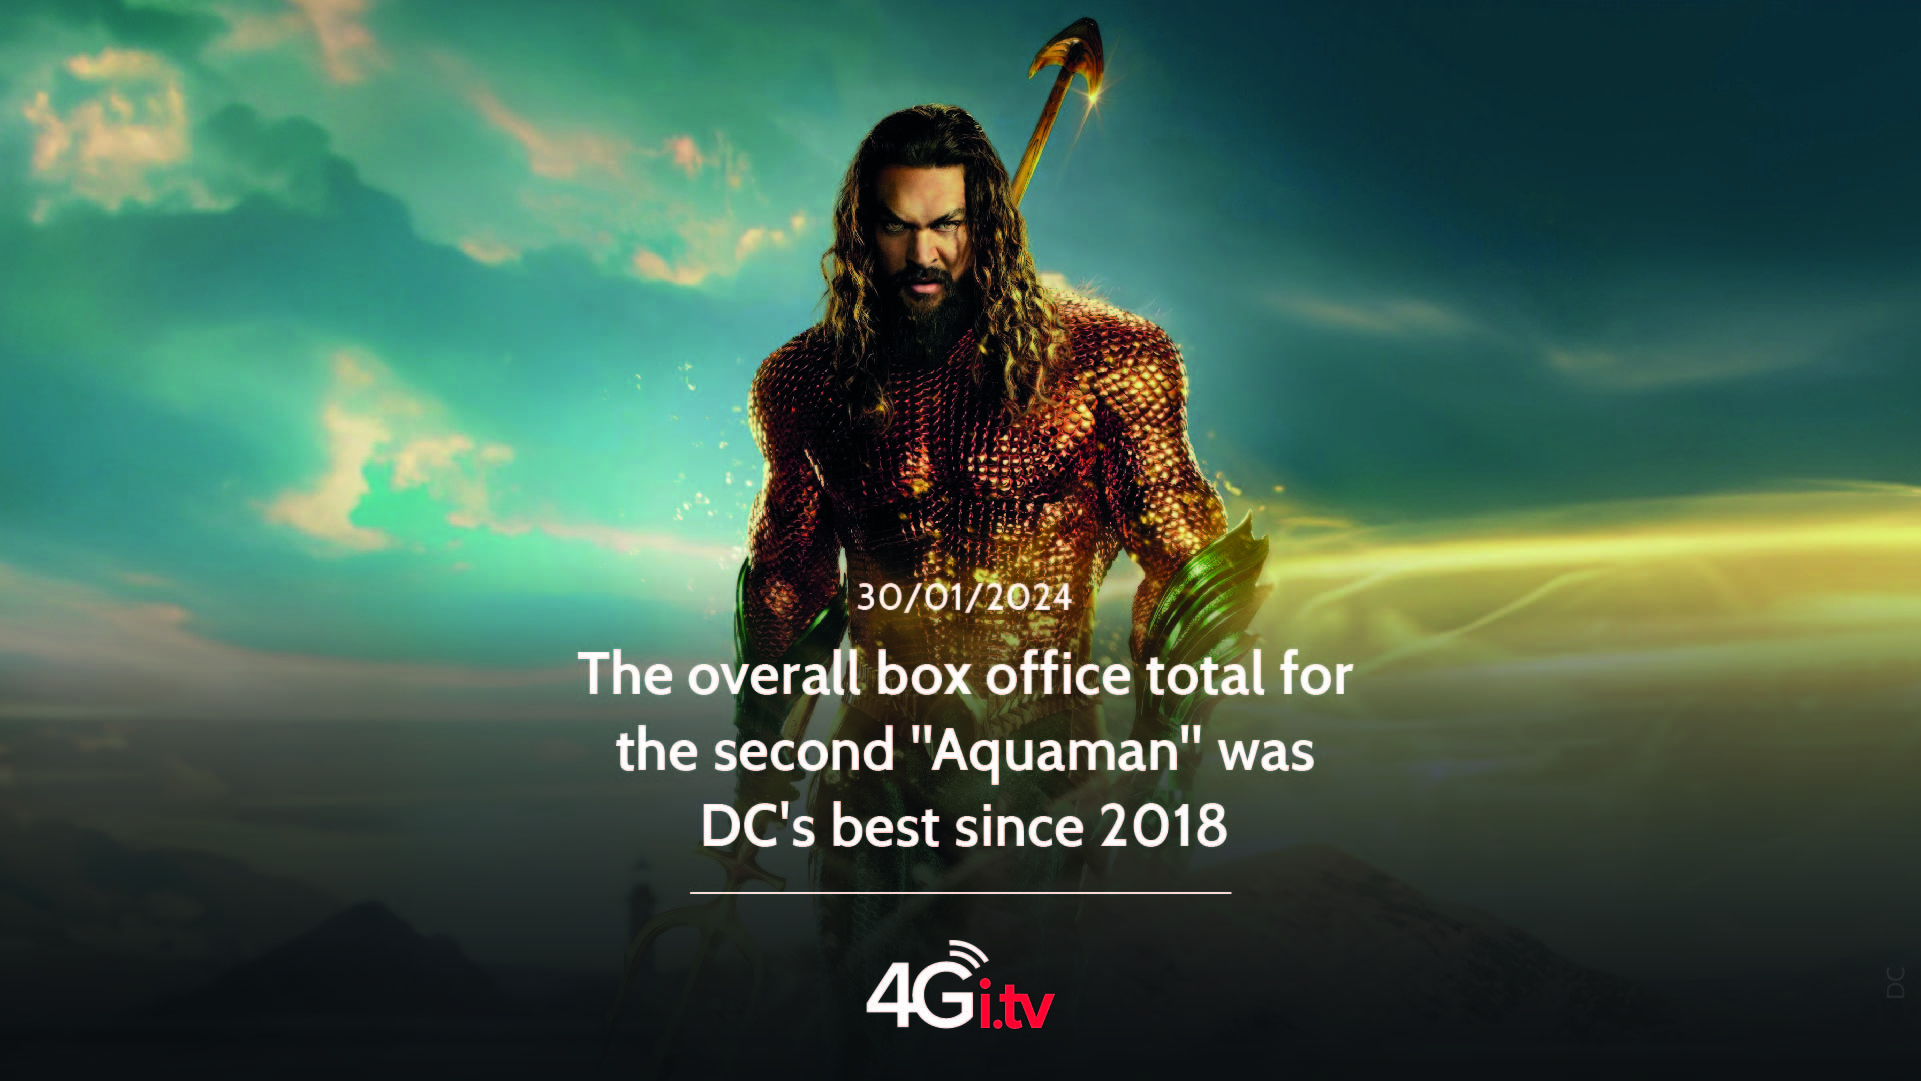 Lee más sobre el artículo The overall box office total for the second “Aquaman” was DC’s best since 2018